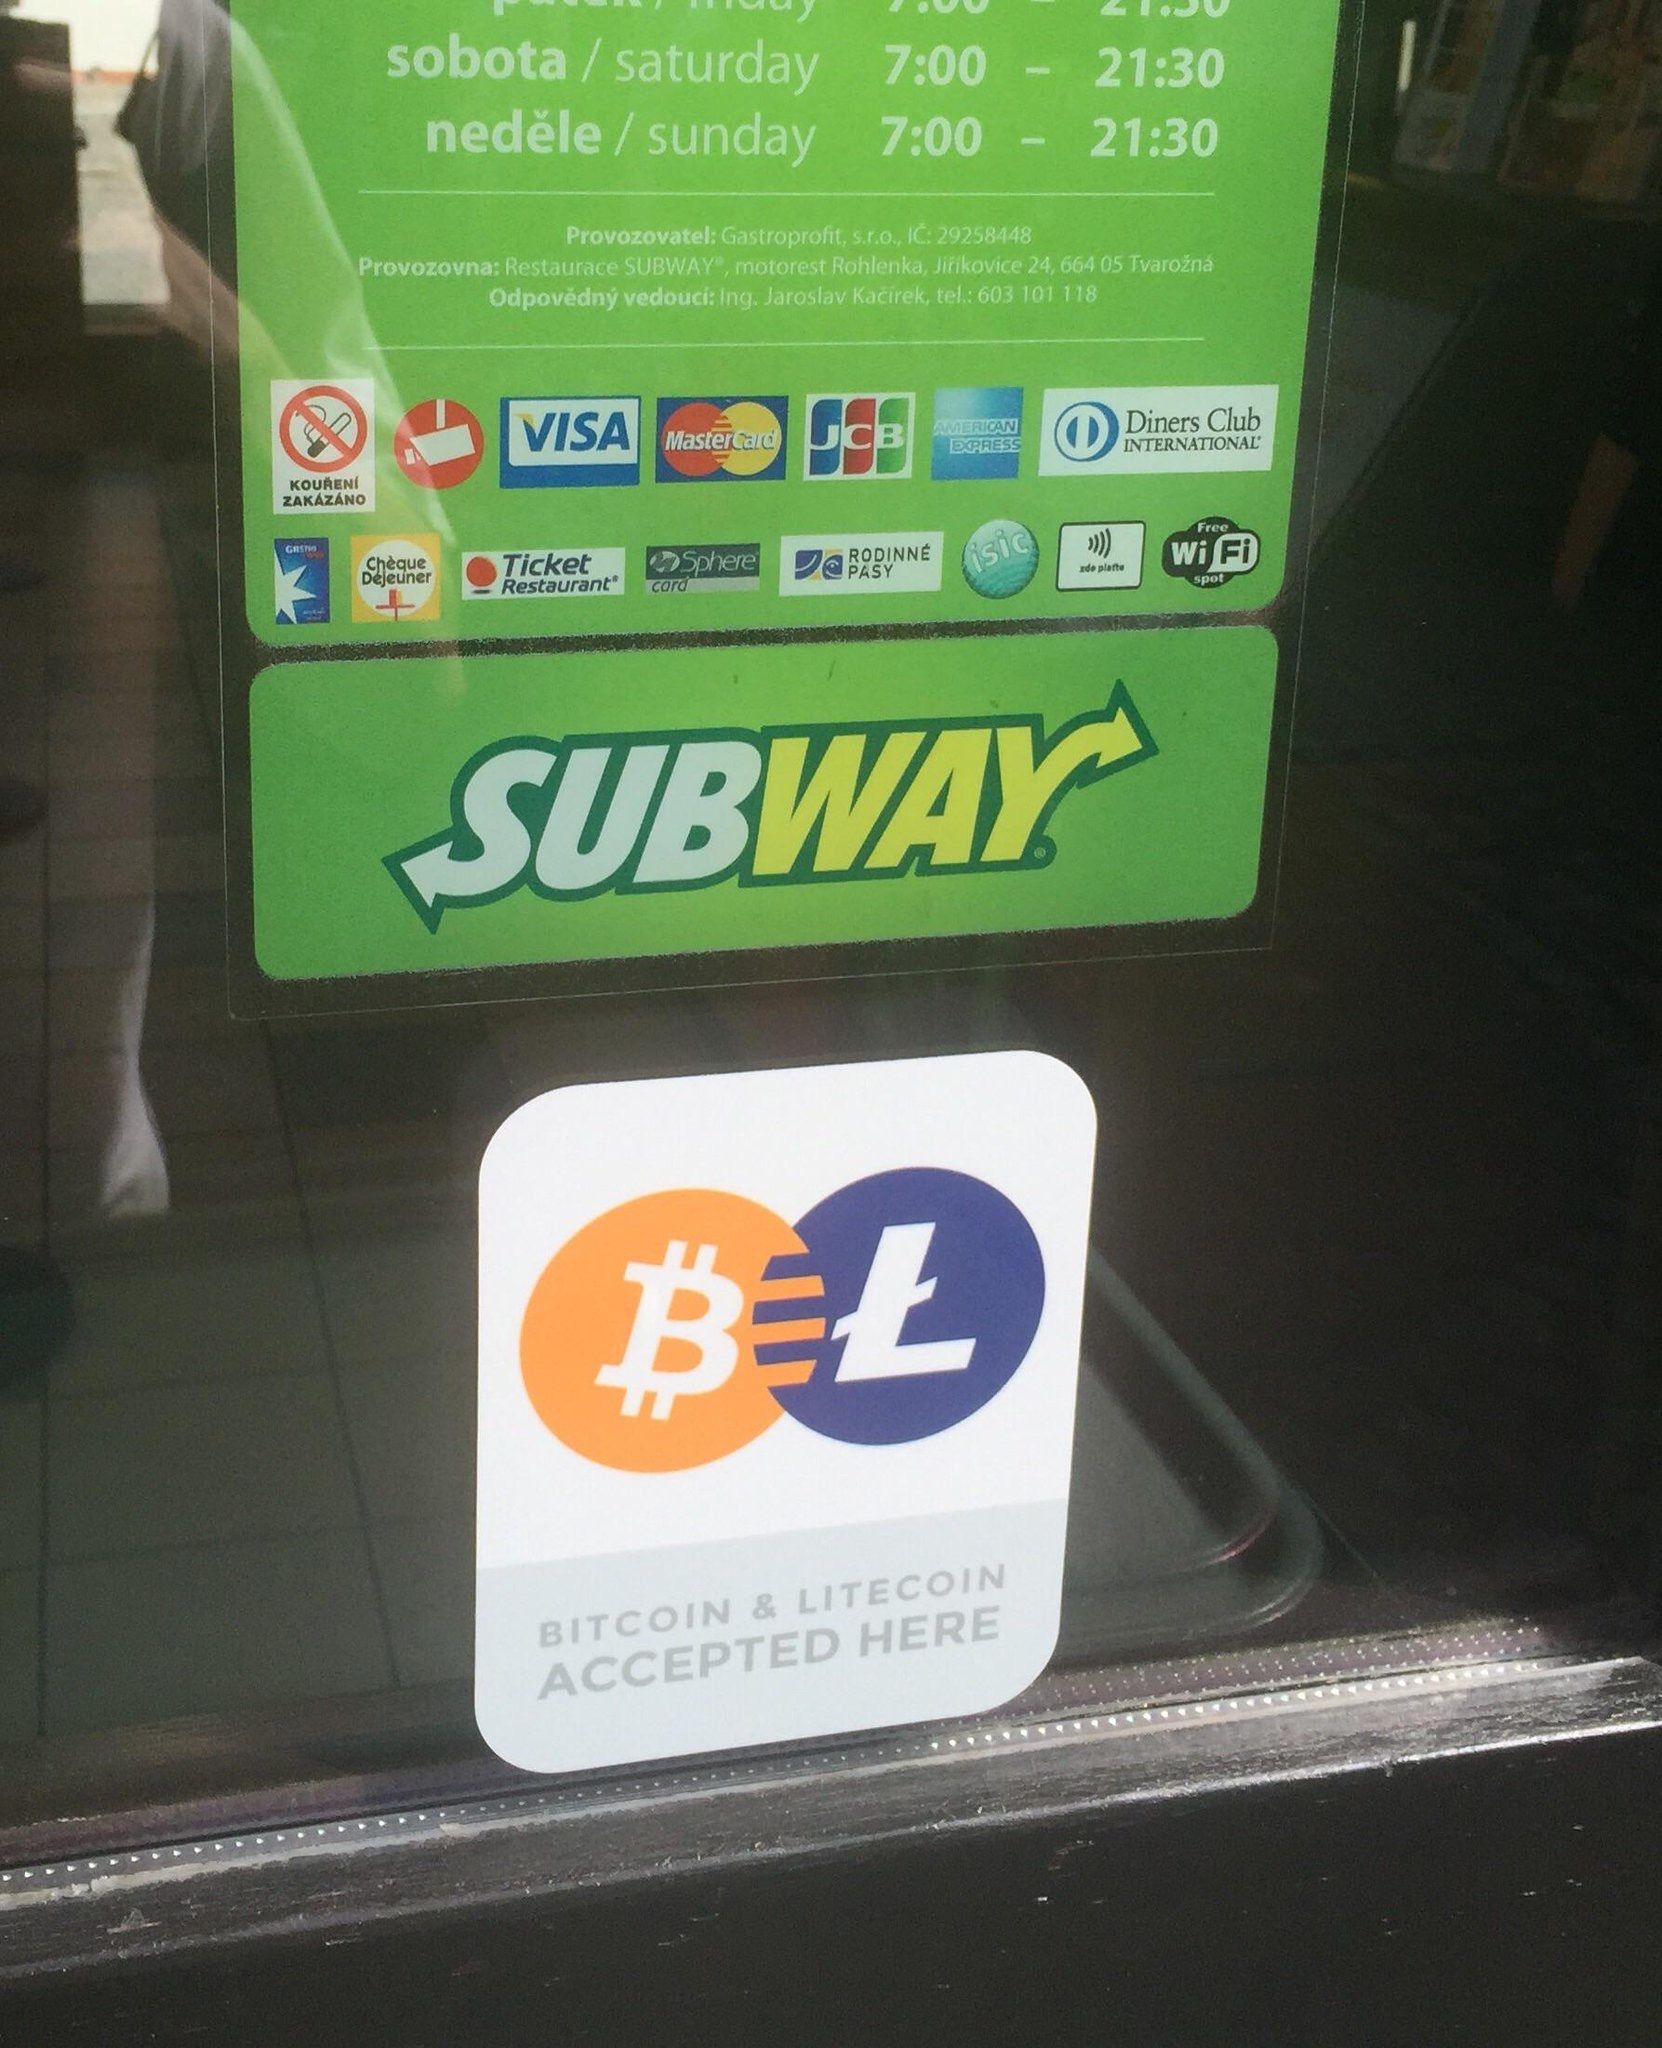 how to buy subway with bitcoin